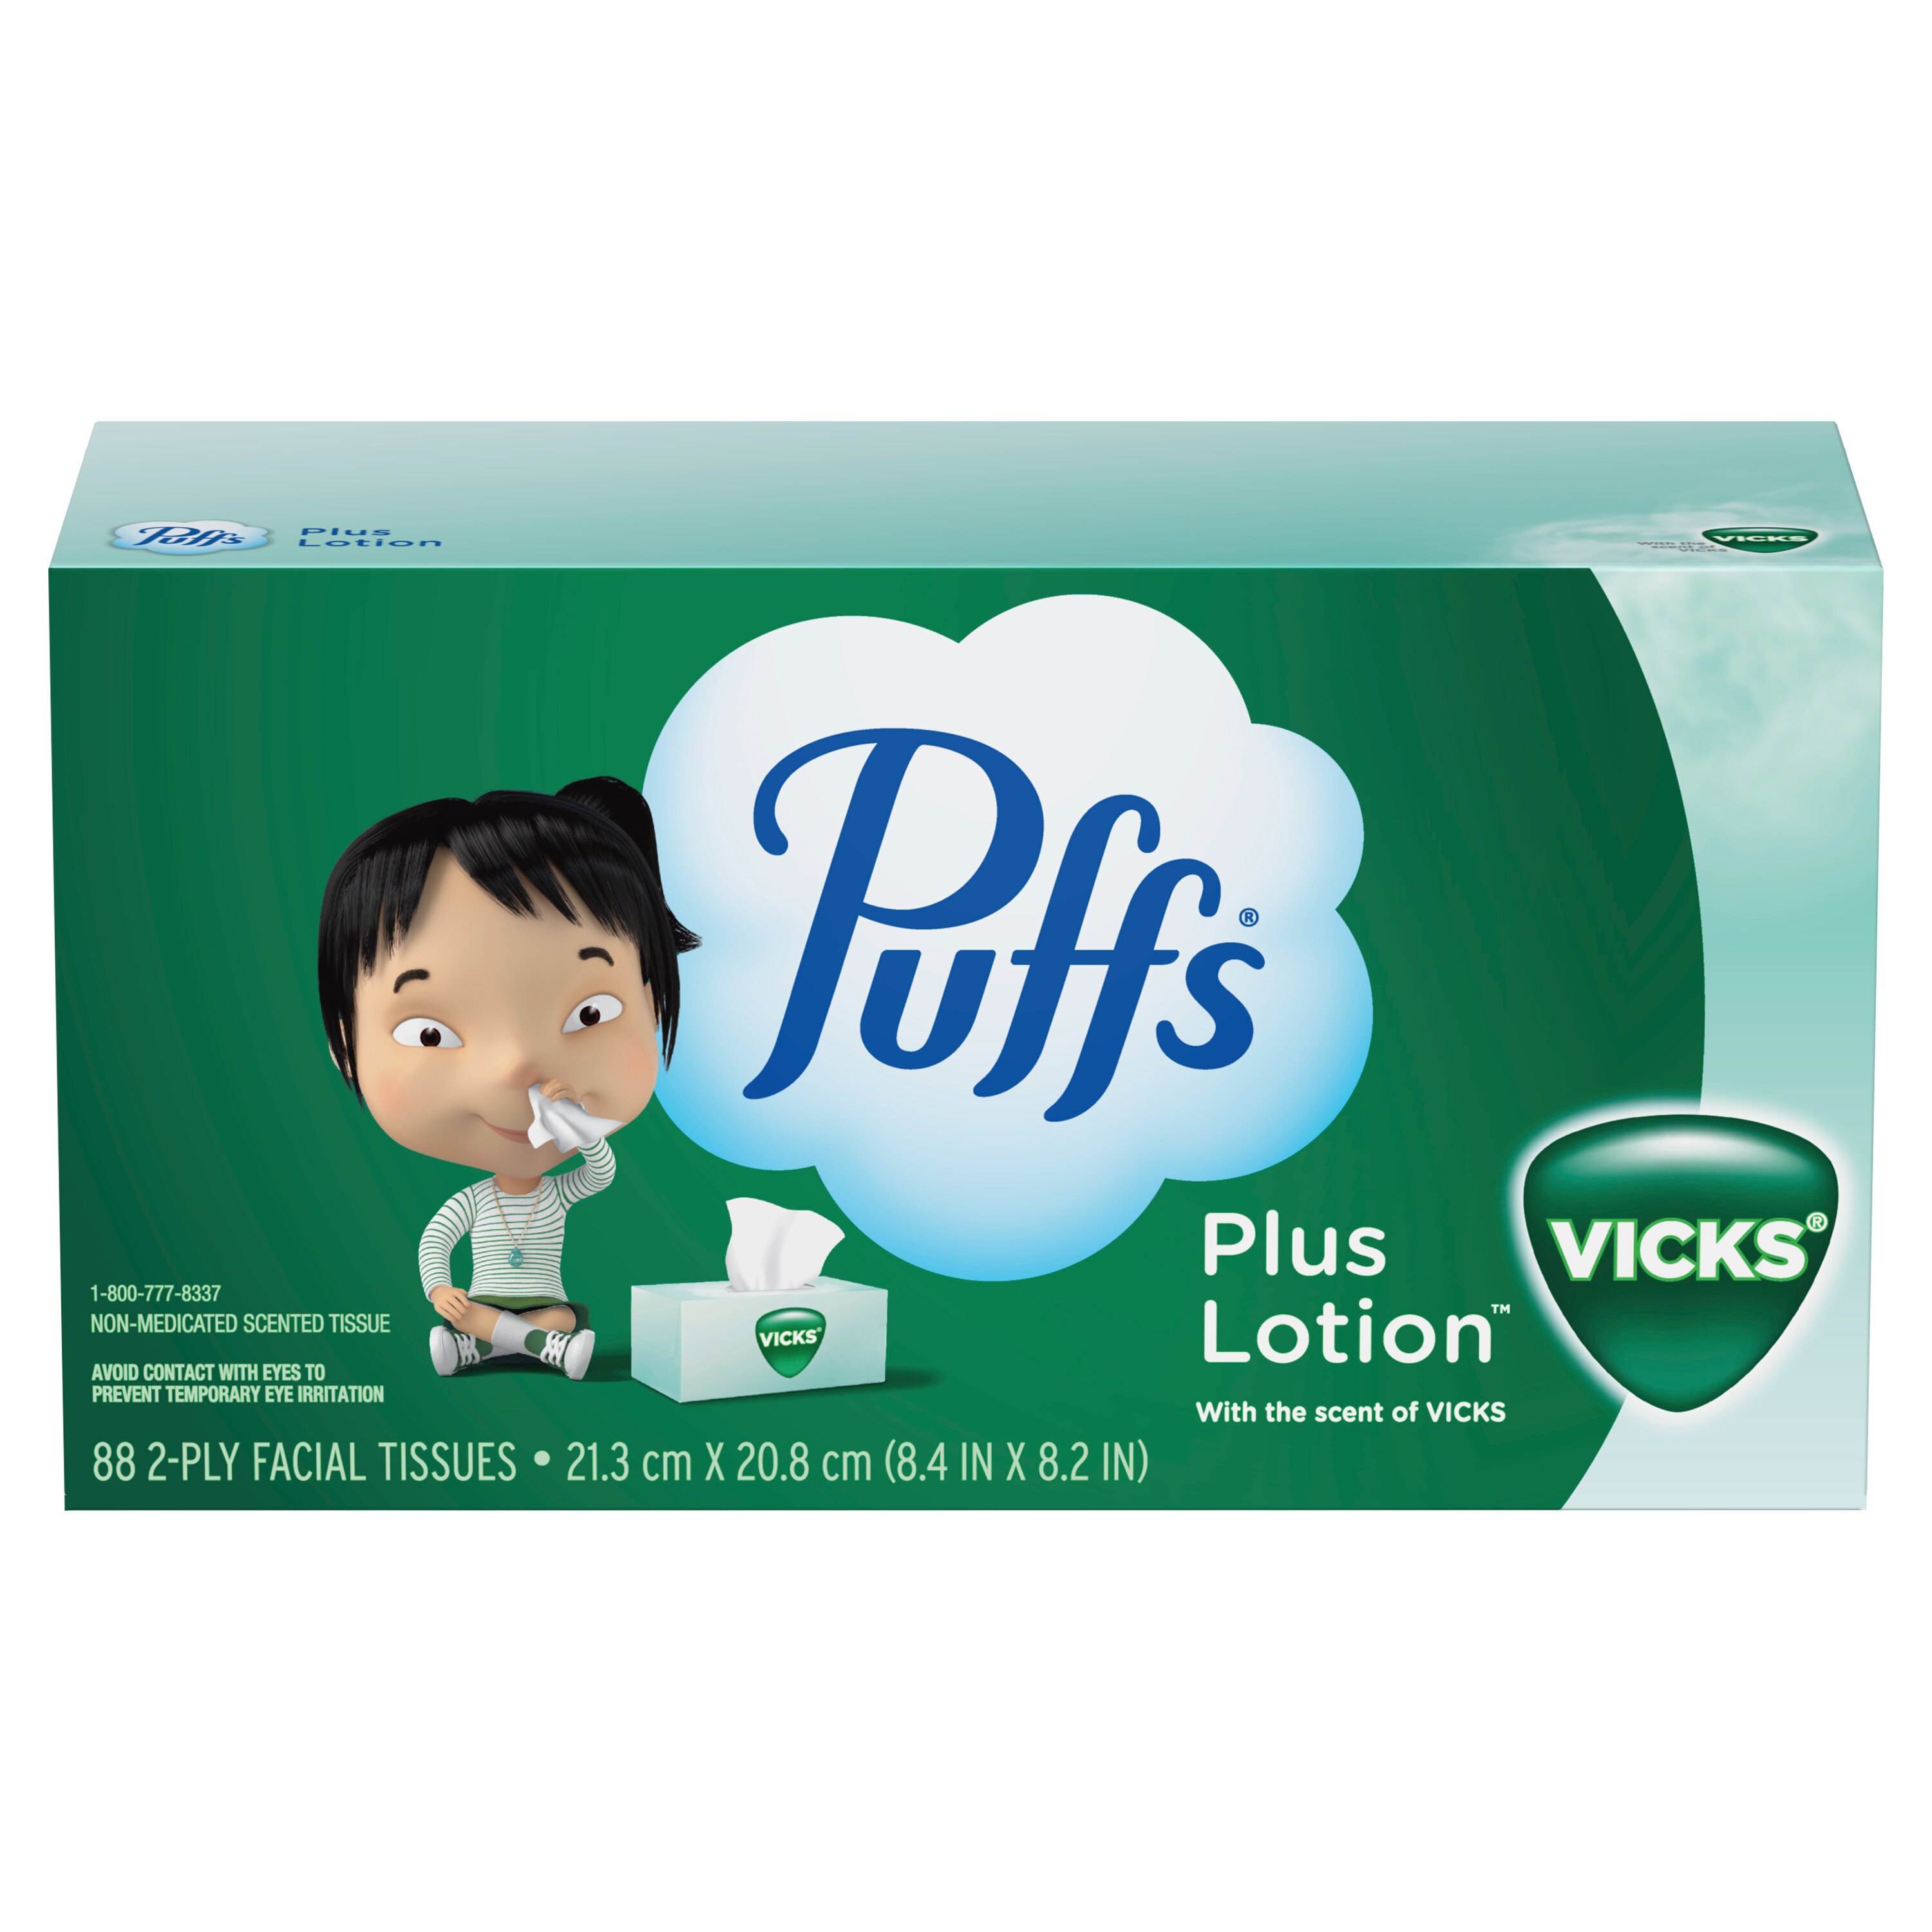 Puffs Plus Lotion With The Scent Of Vick's Facial Tissues, 1 Family Size Box, 88 Tissues Per Box - 88 Ct , CVS